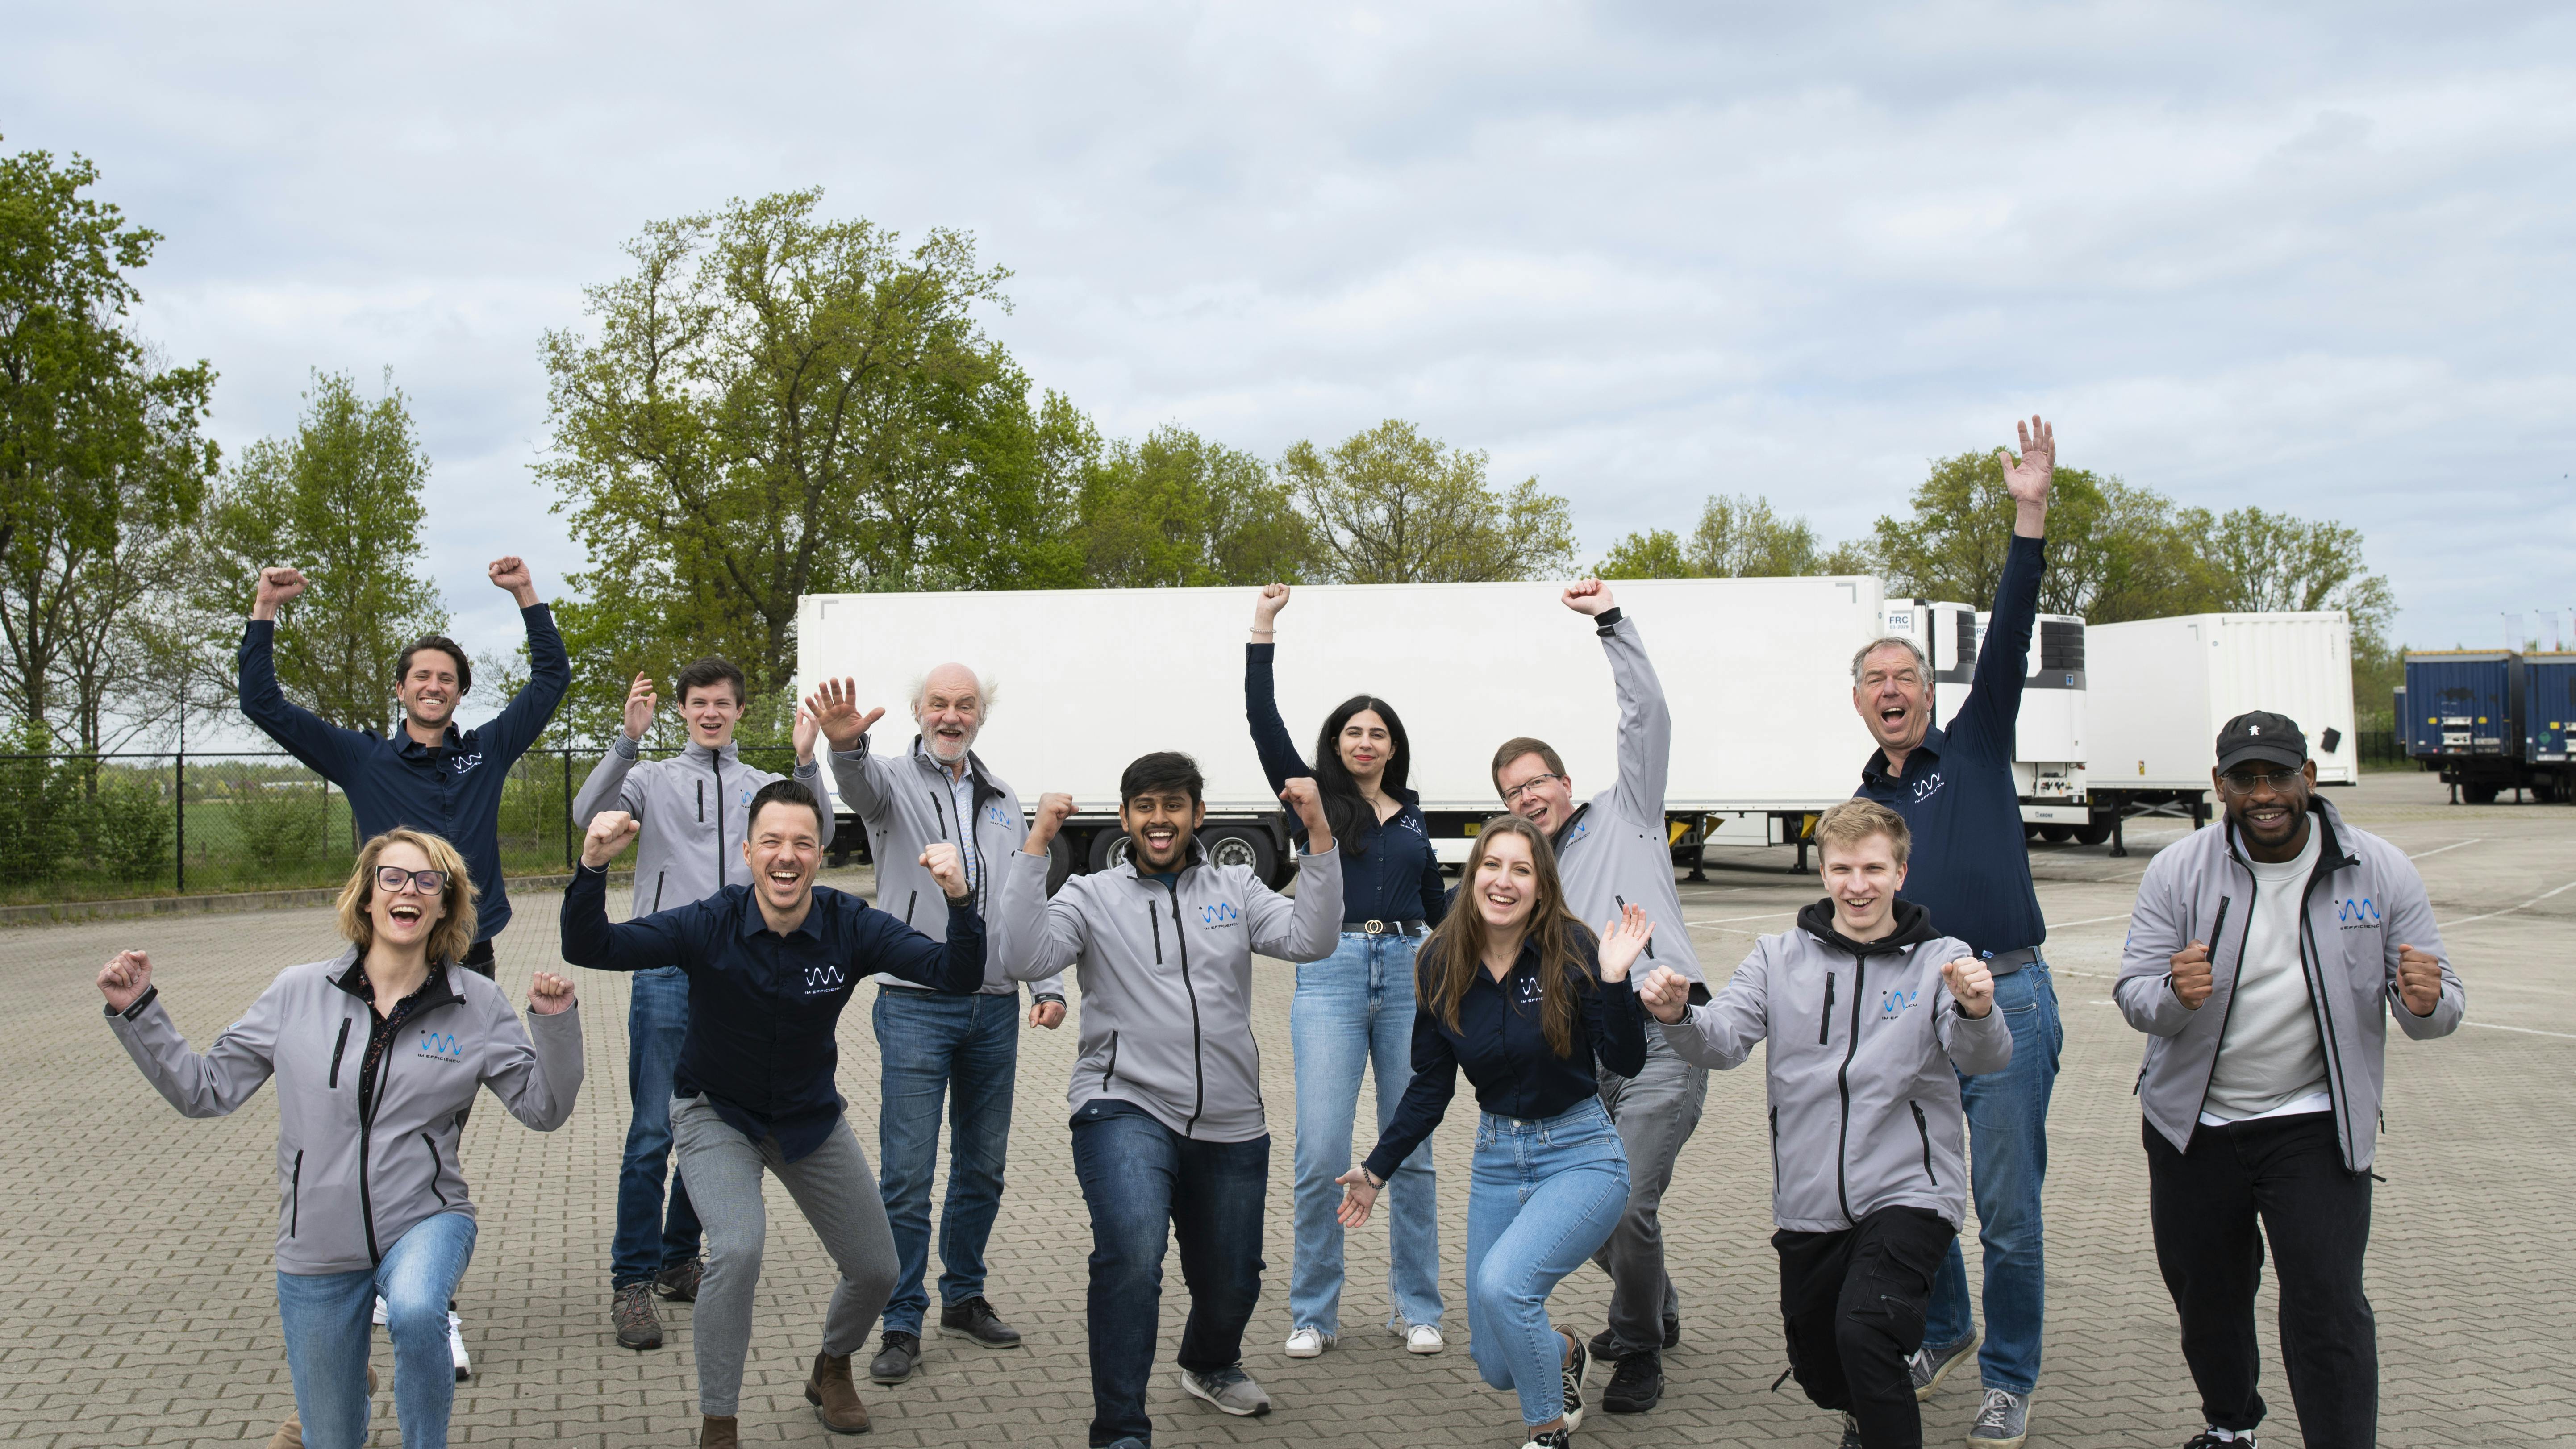 IM Efficiency raises large Seed Round from BOM, Rockstart, and private investors to accelerate the use of solar energy in road freight transportation